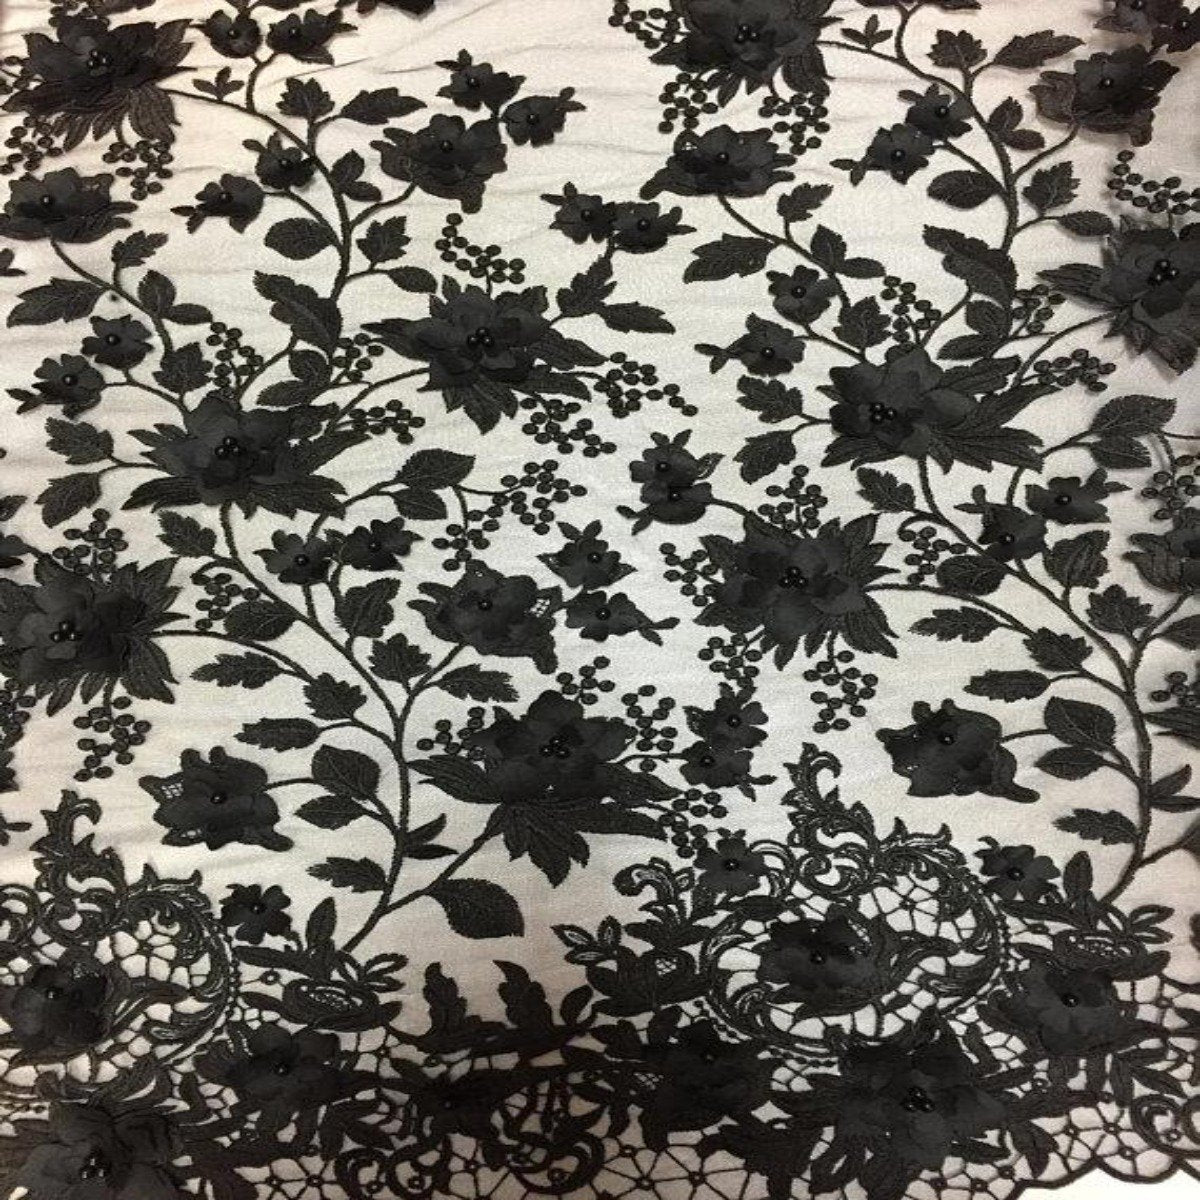 Black 3D Embroidered Satin Floral Pearl Lace Fabric - Fashion Fabrics LLC